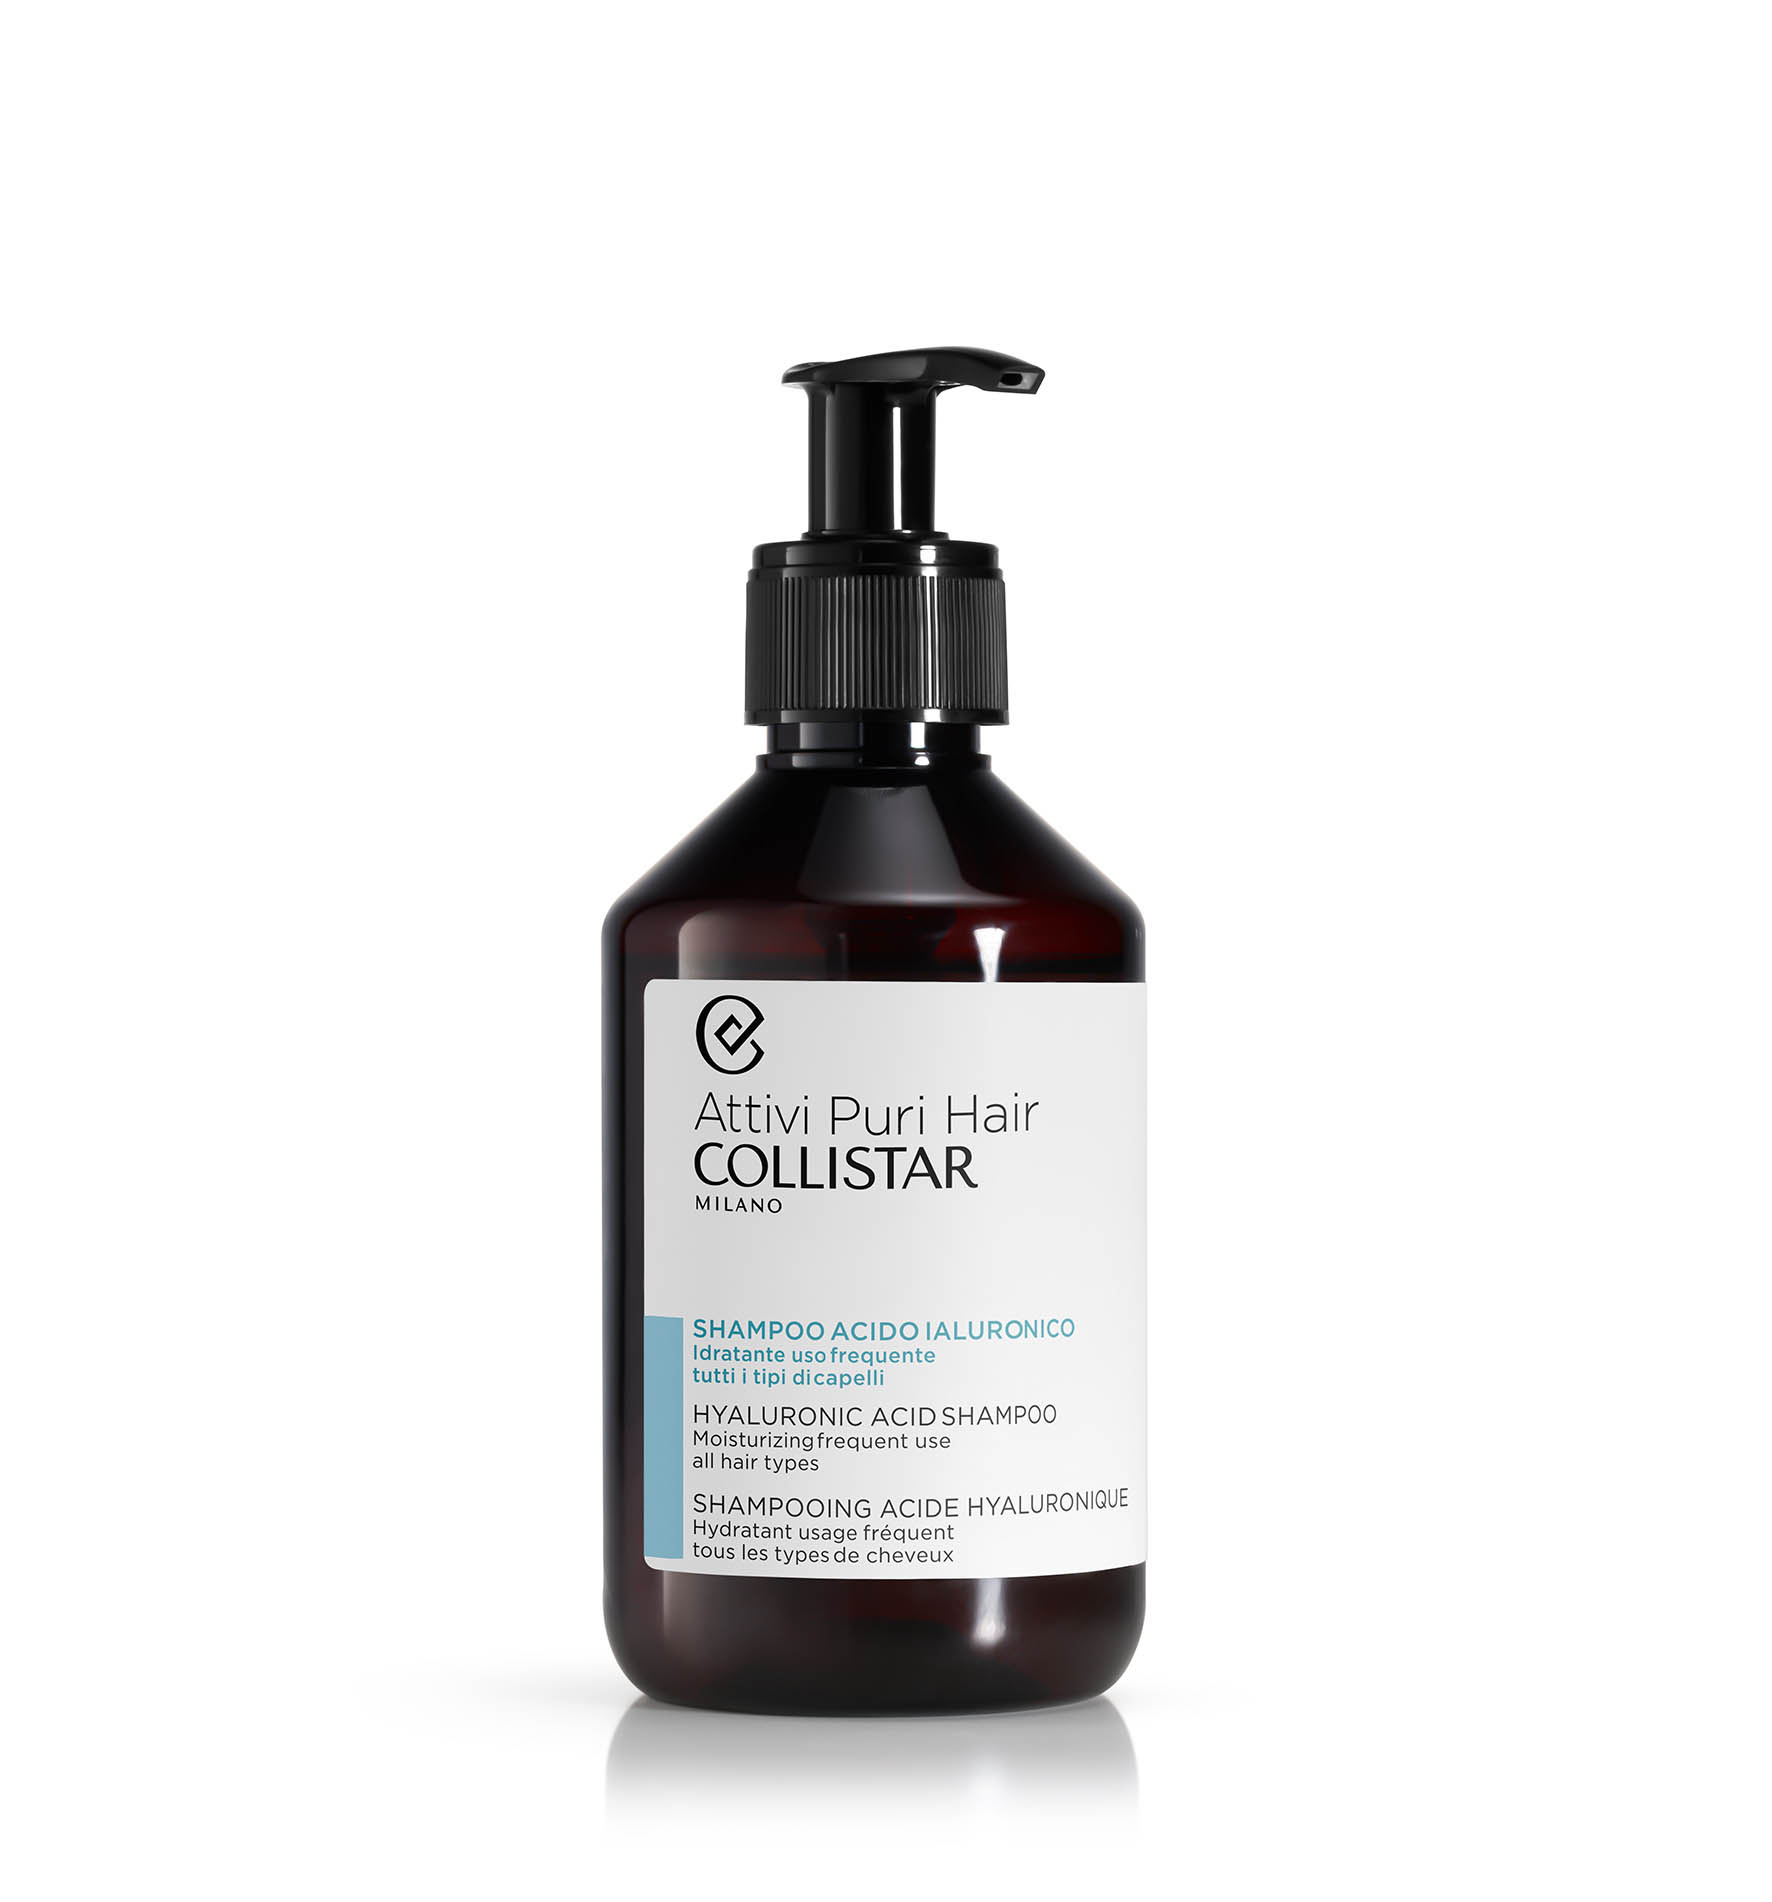 HYALURONIC ACID SHAMPOO - Frequent Washing | Collistar - Shop Online Ufficiale